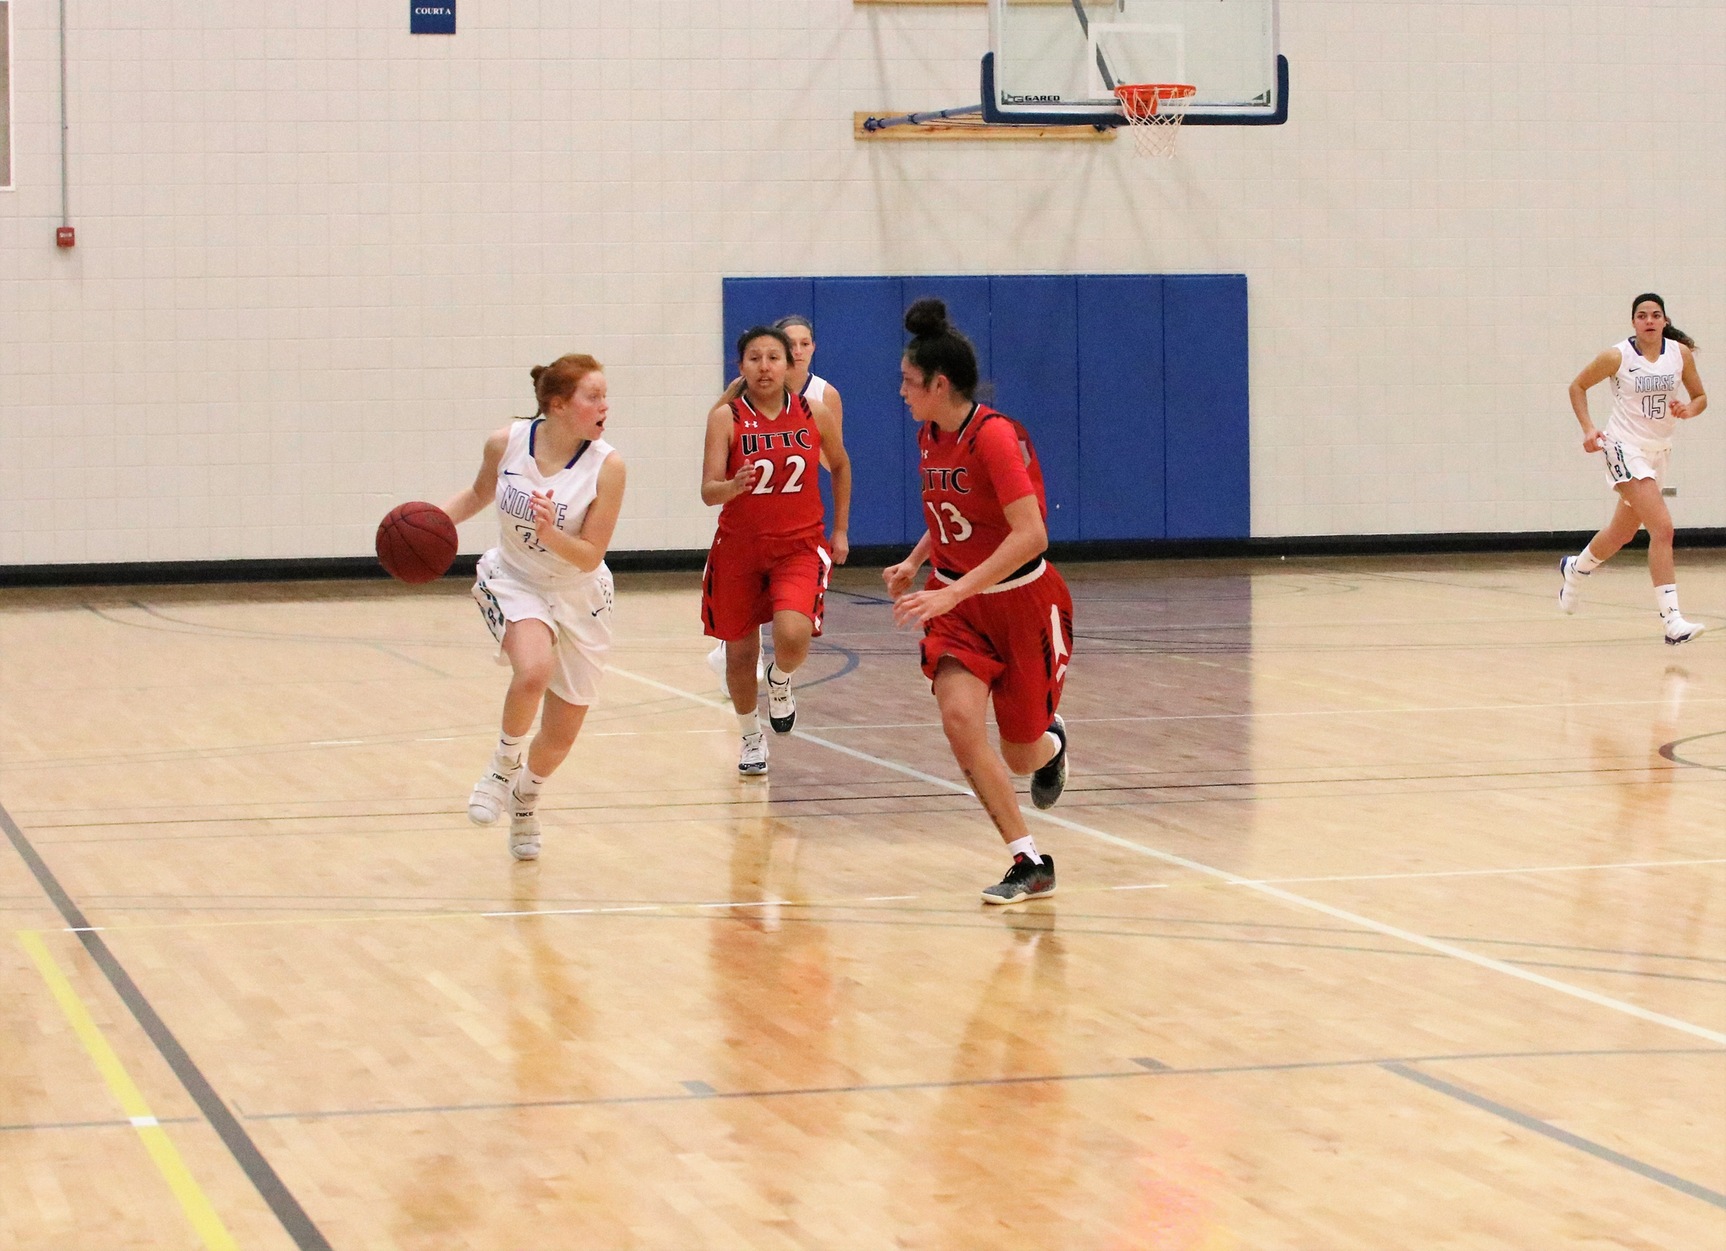 JuliAnn Wickman brings the ball up the sideline, two defenders close in